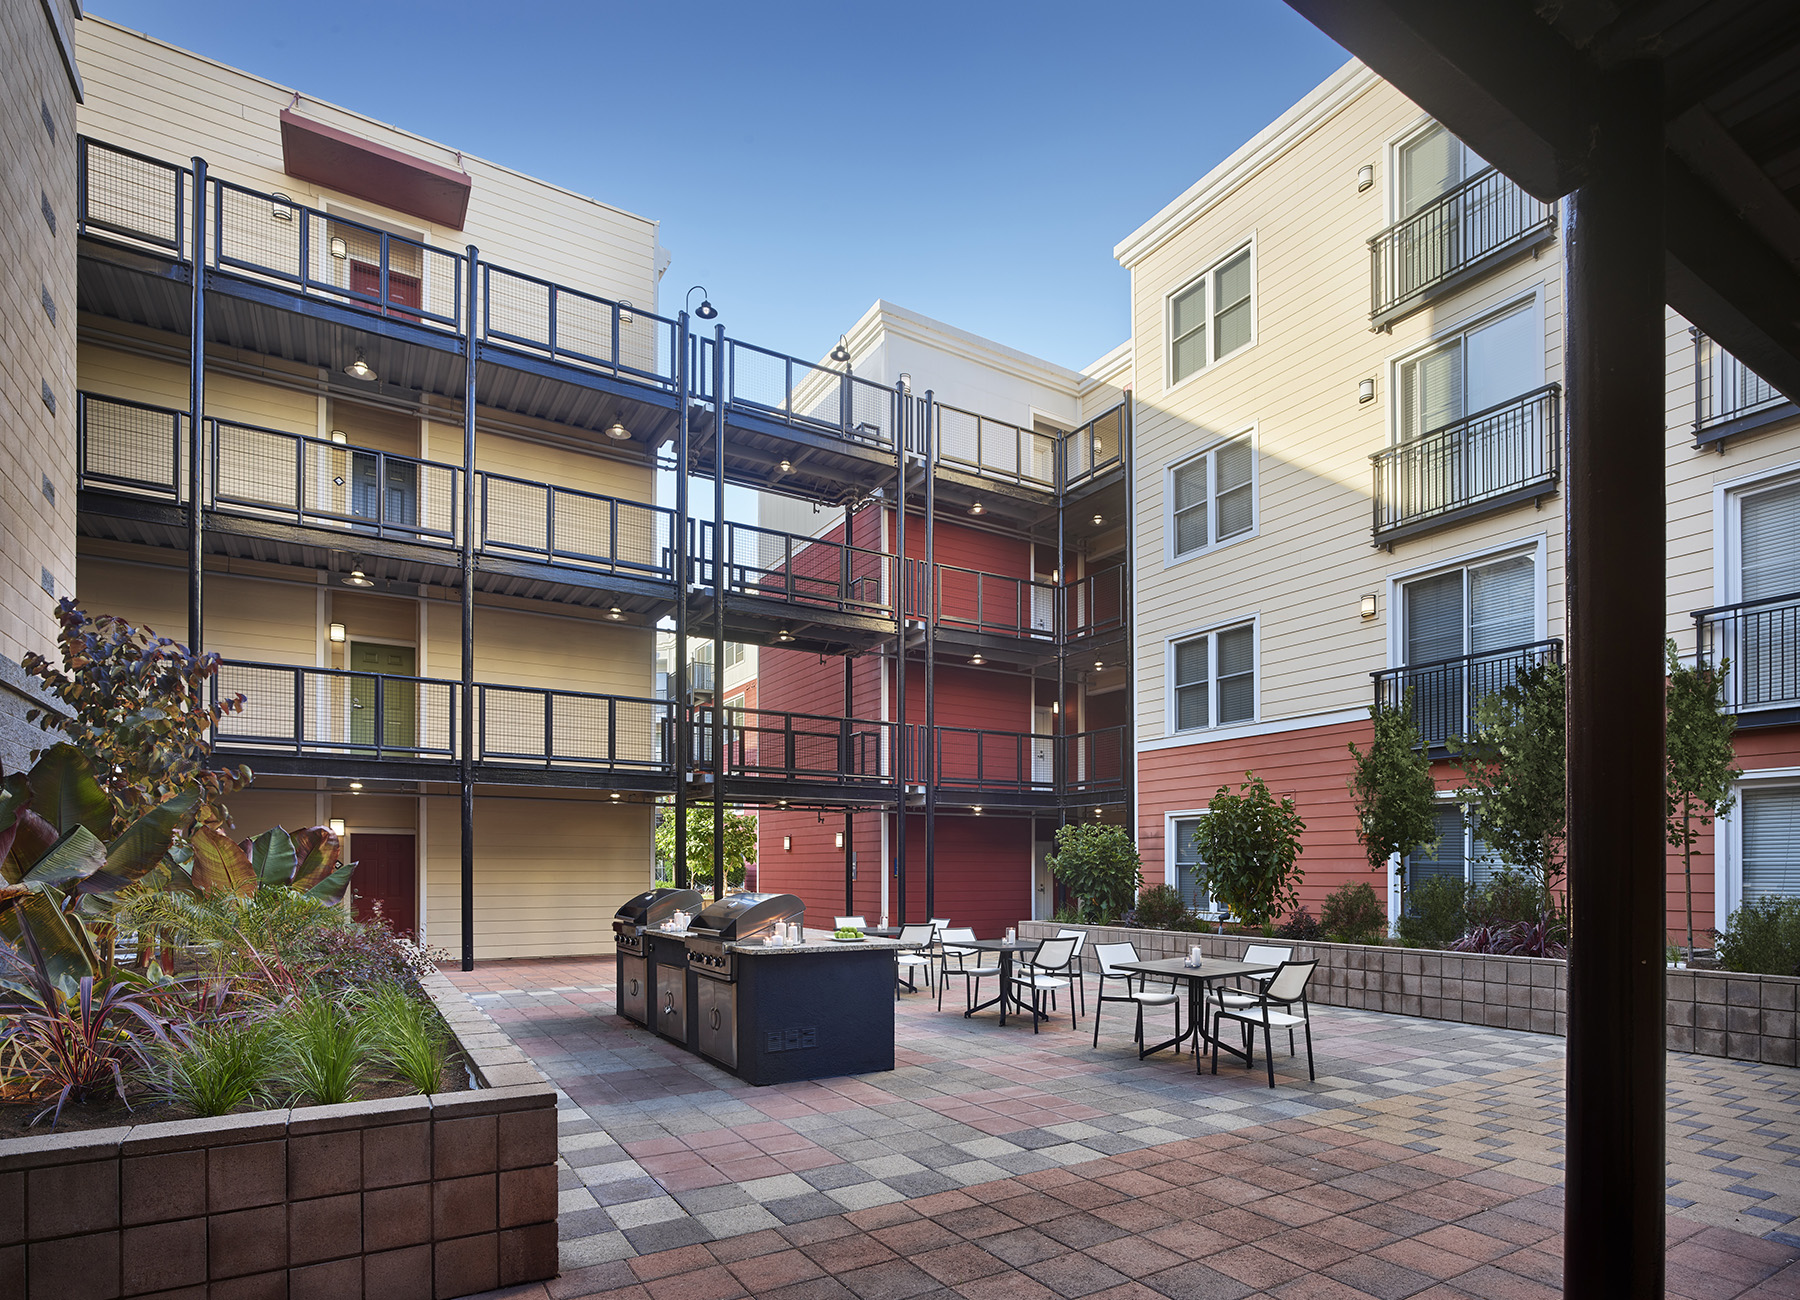 Exterior courtyard with tables and bbq grills, surrounded by a midrise AVE Emeryville apartment building